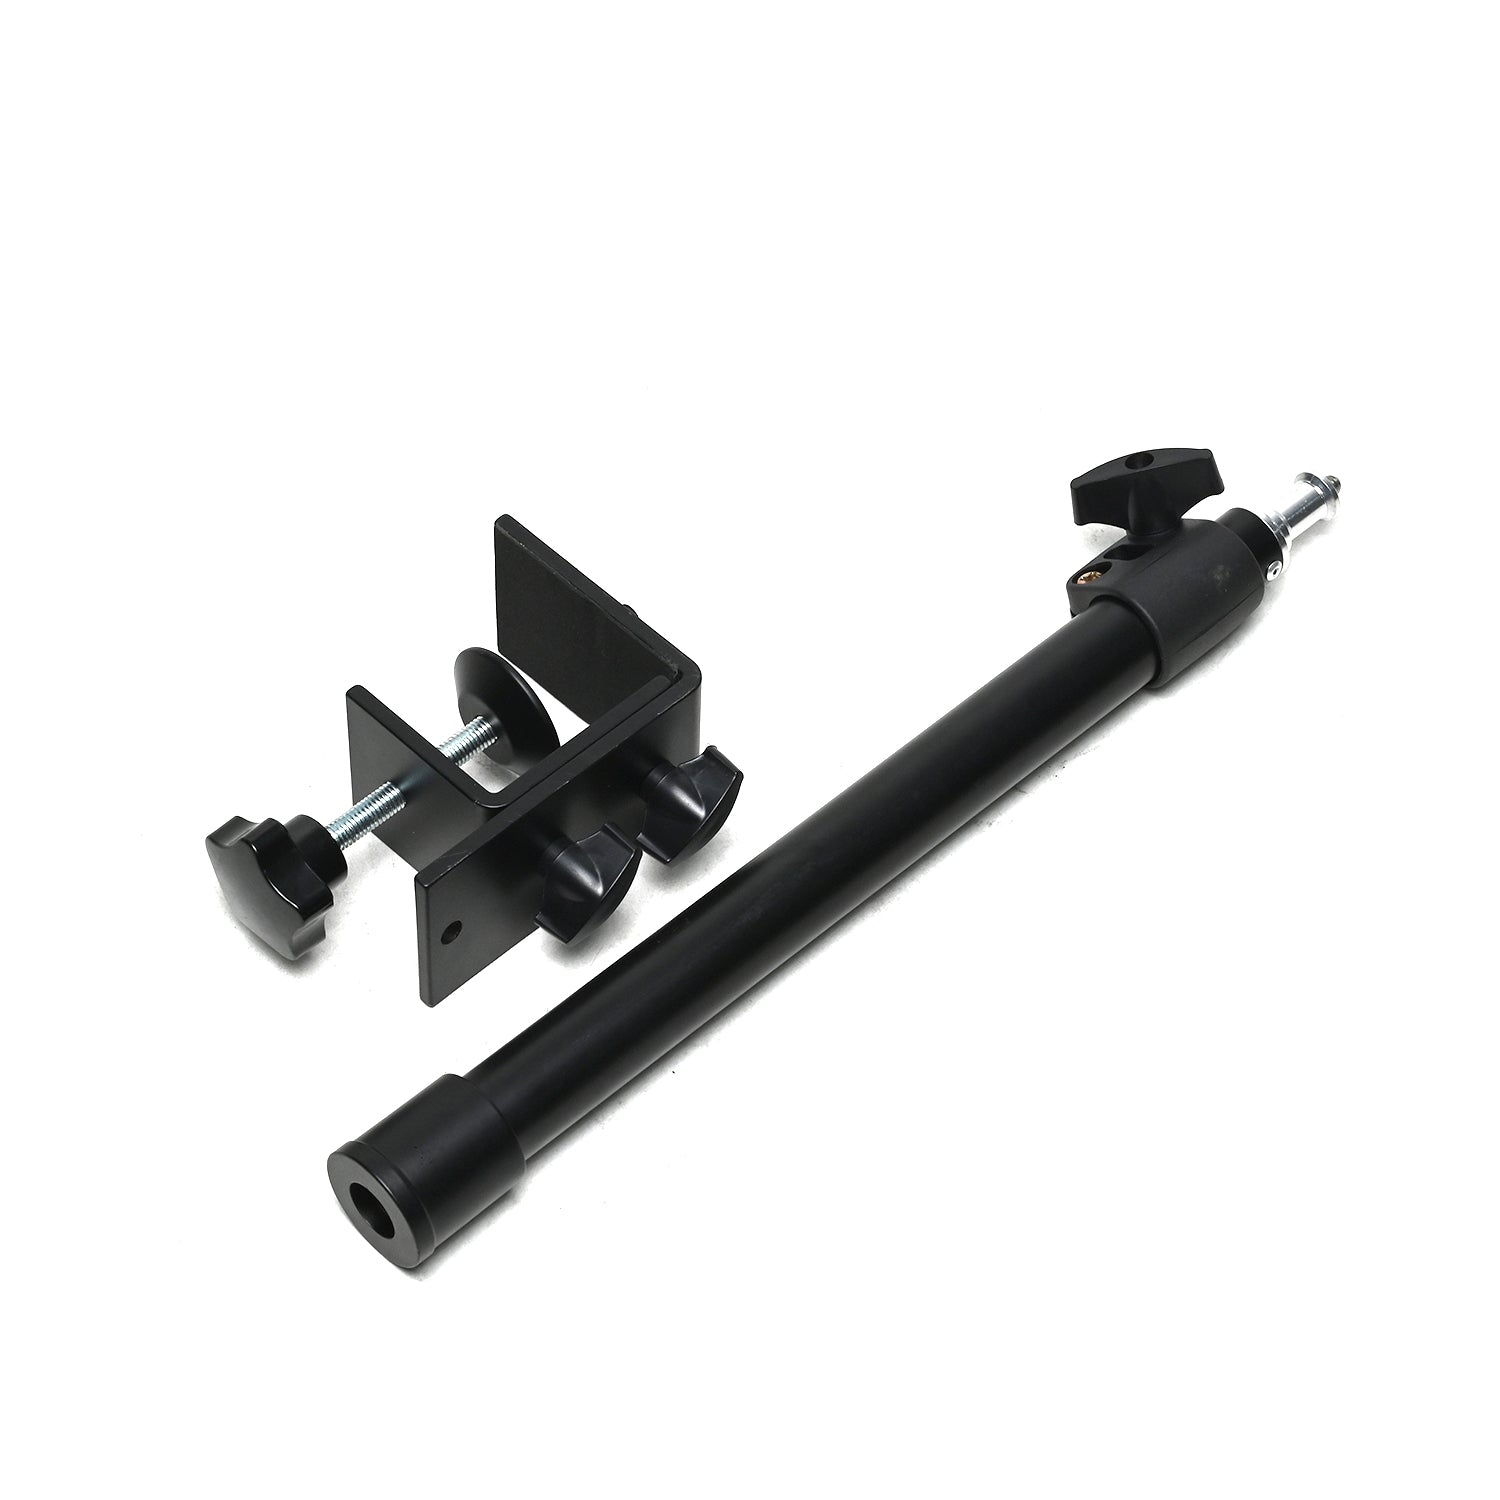 Desk Mount Stand Tabletop C-Clamp For Light